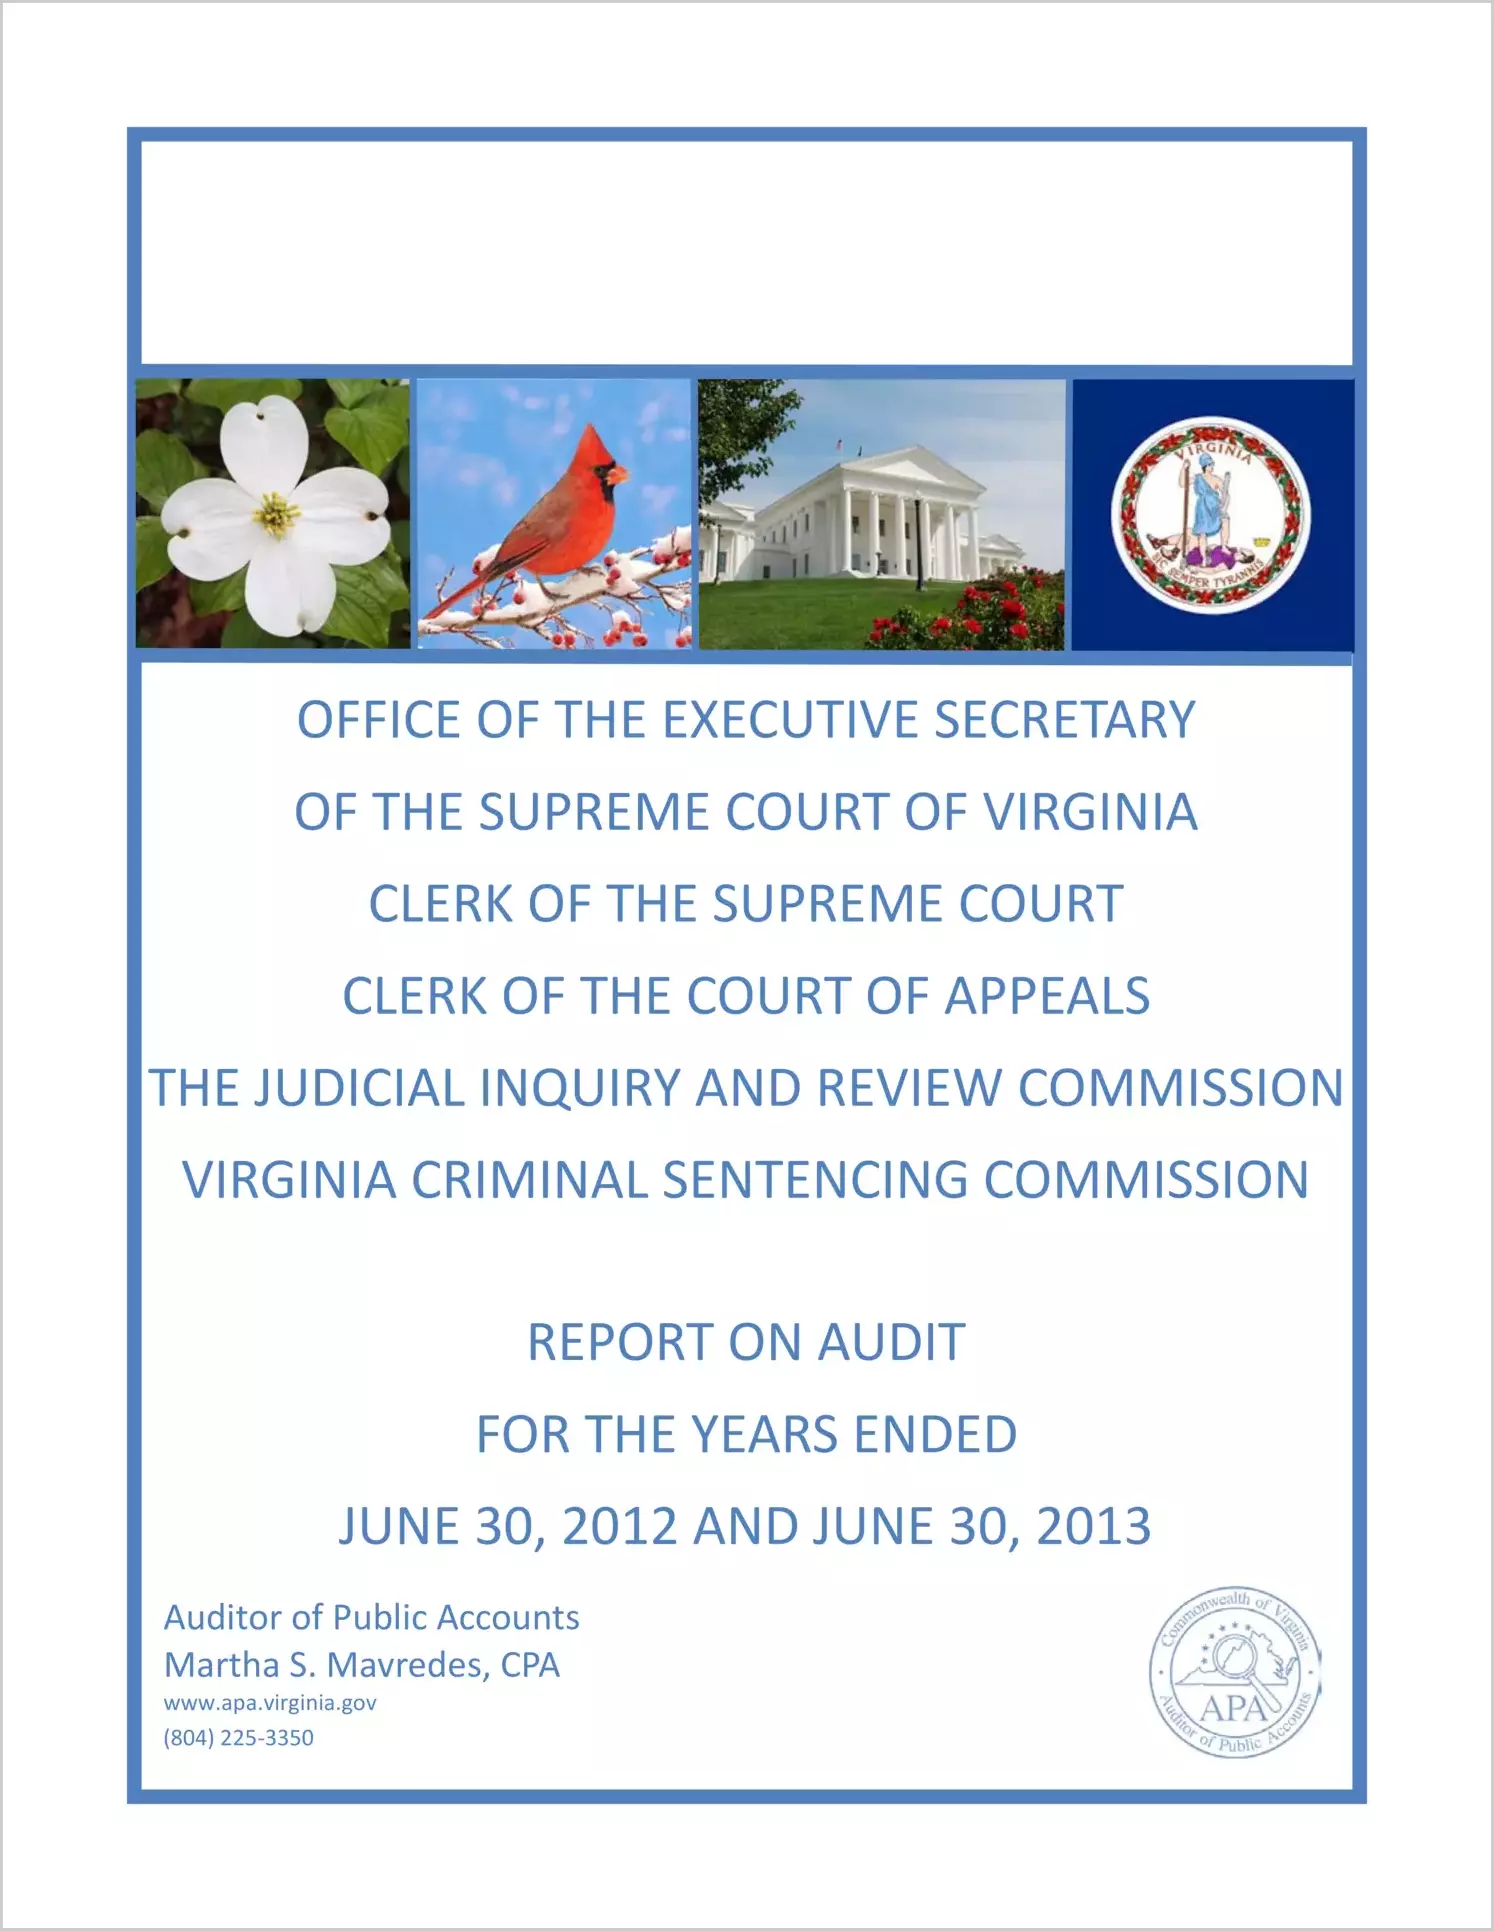 Virginia's Judicial System for the years ended June 30, 2012 and June 30, 2013